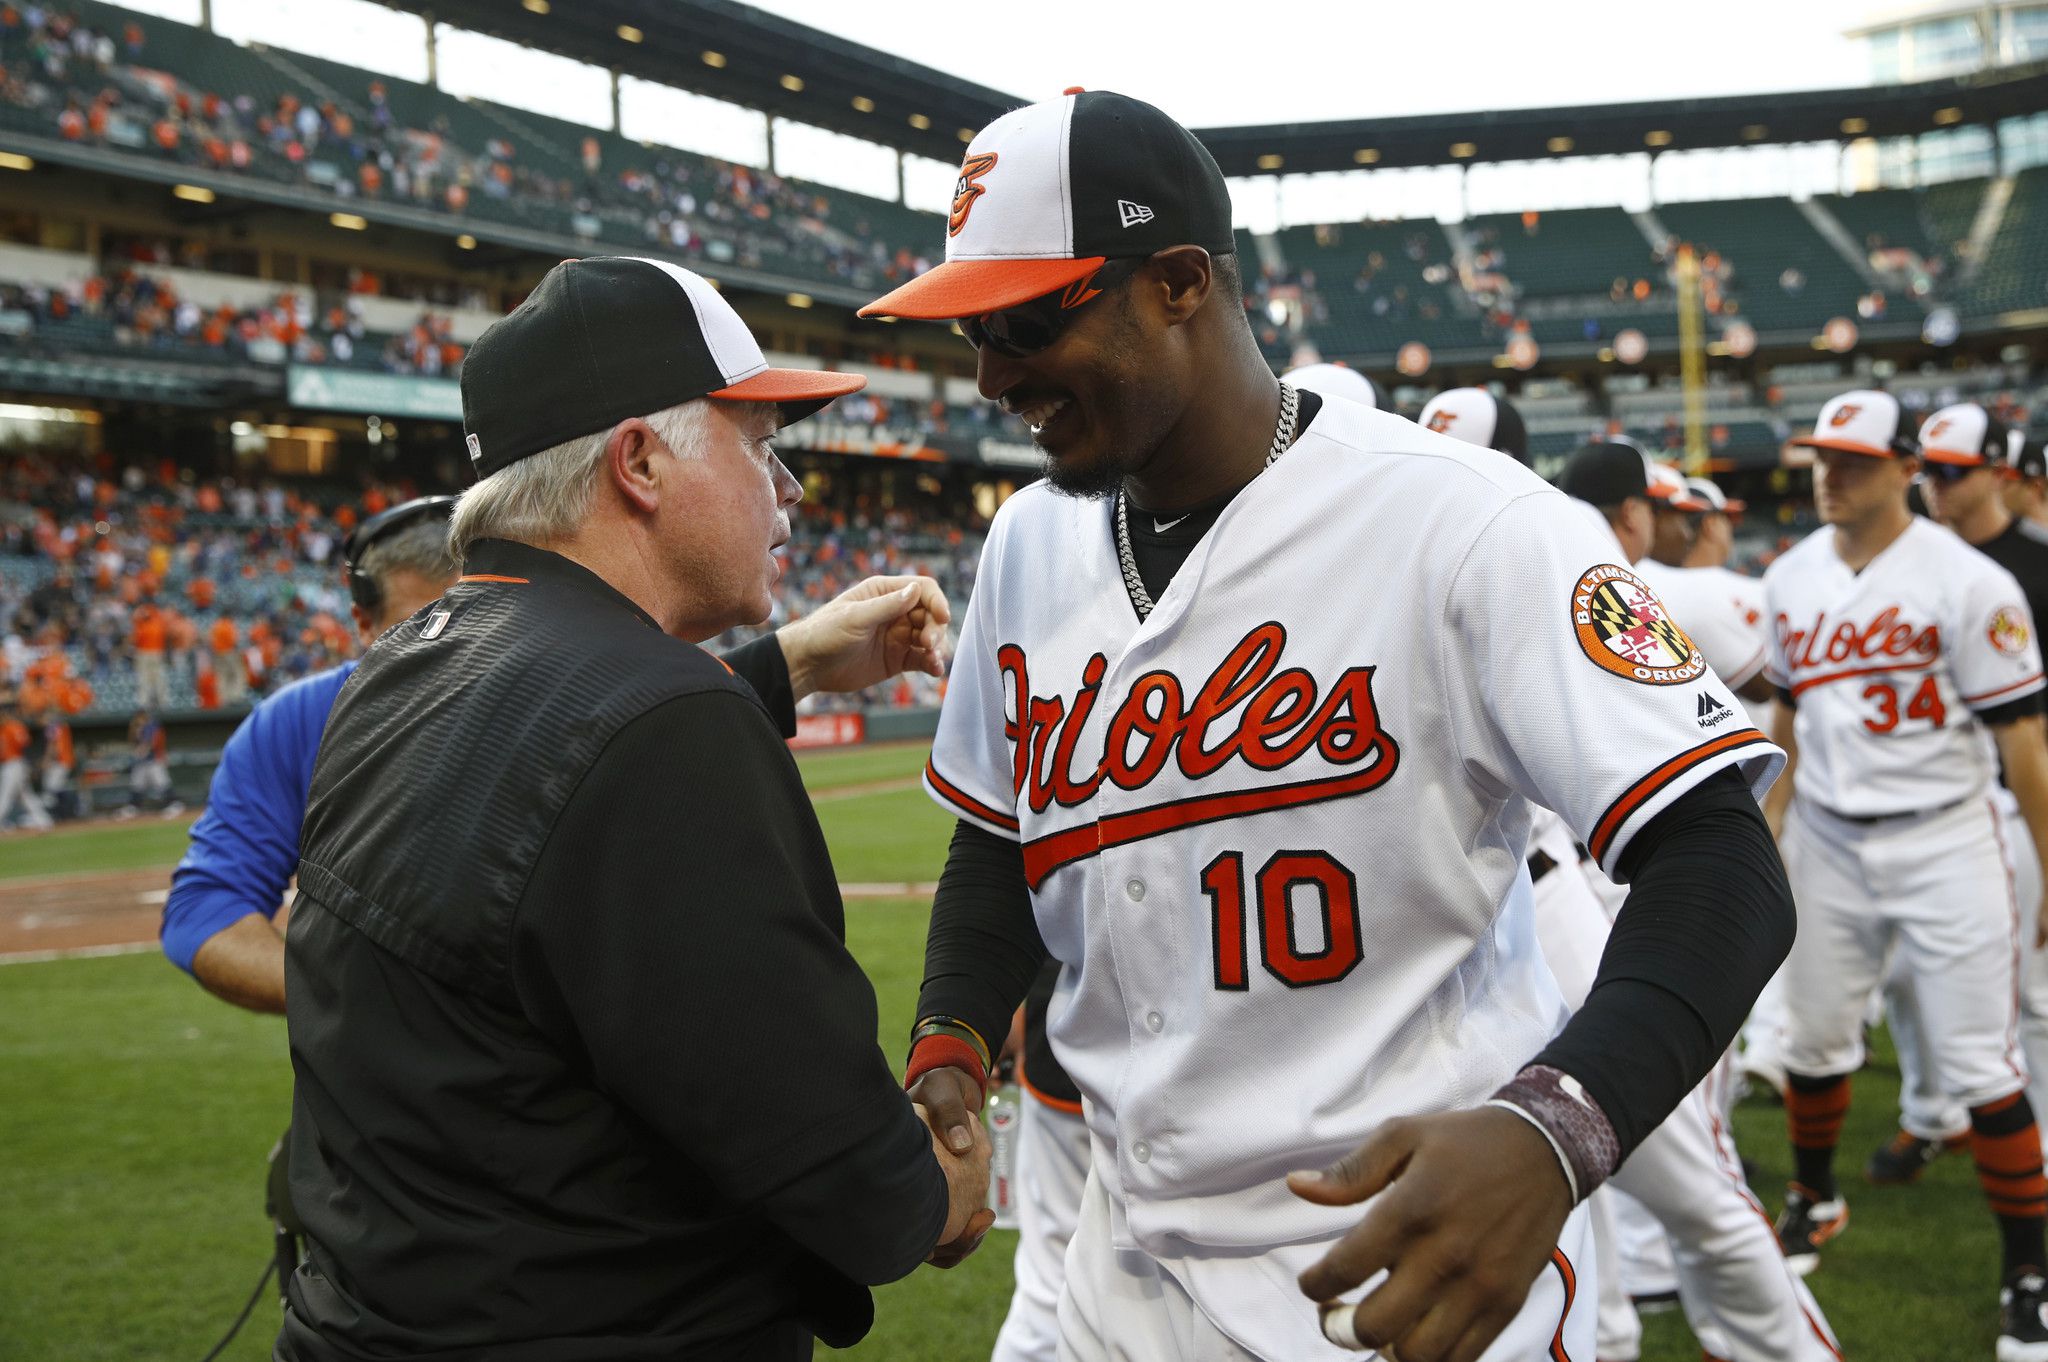 Orioles defeat Rockies 5-4 in front of sellout crowd - Camden Chat